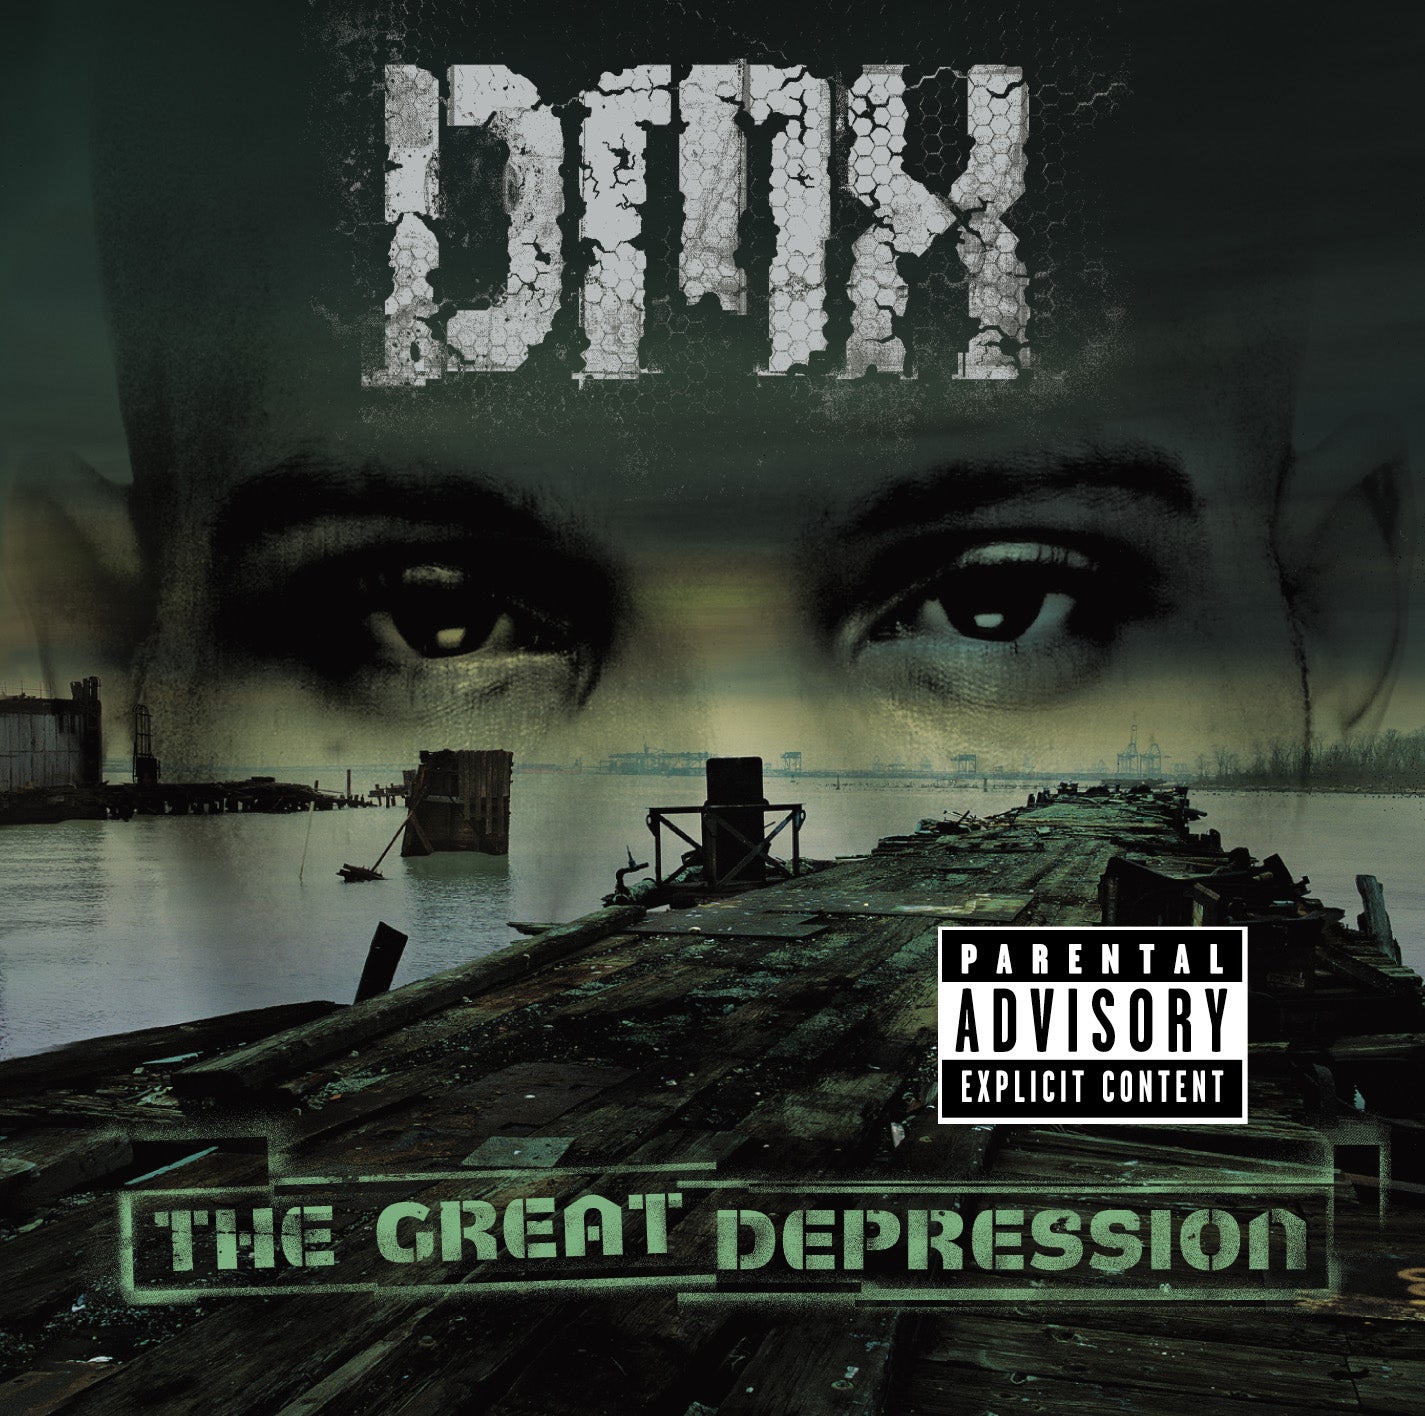 The Great Depression (2LP)